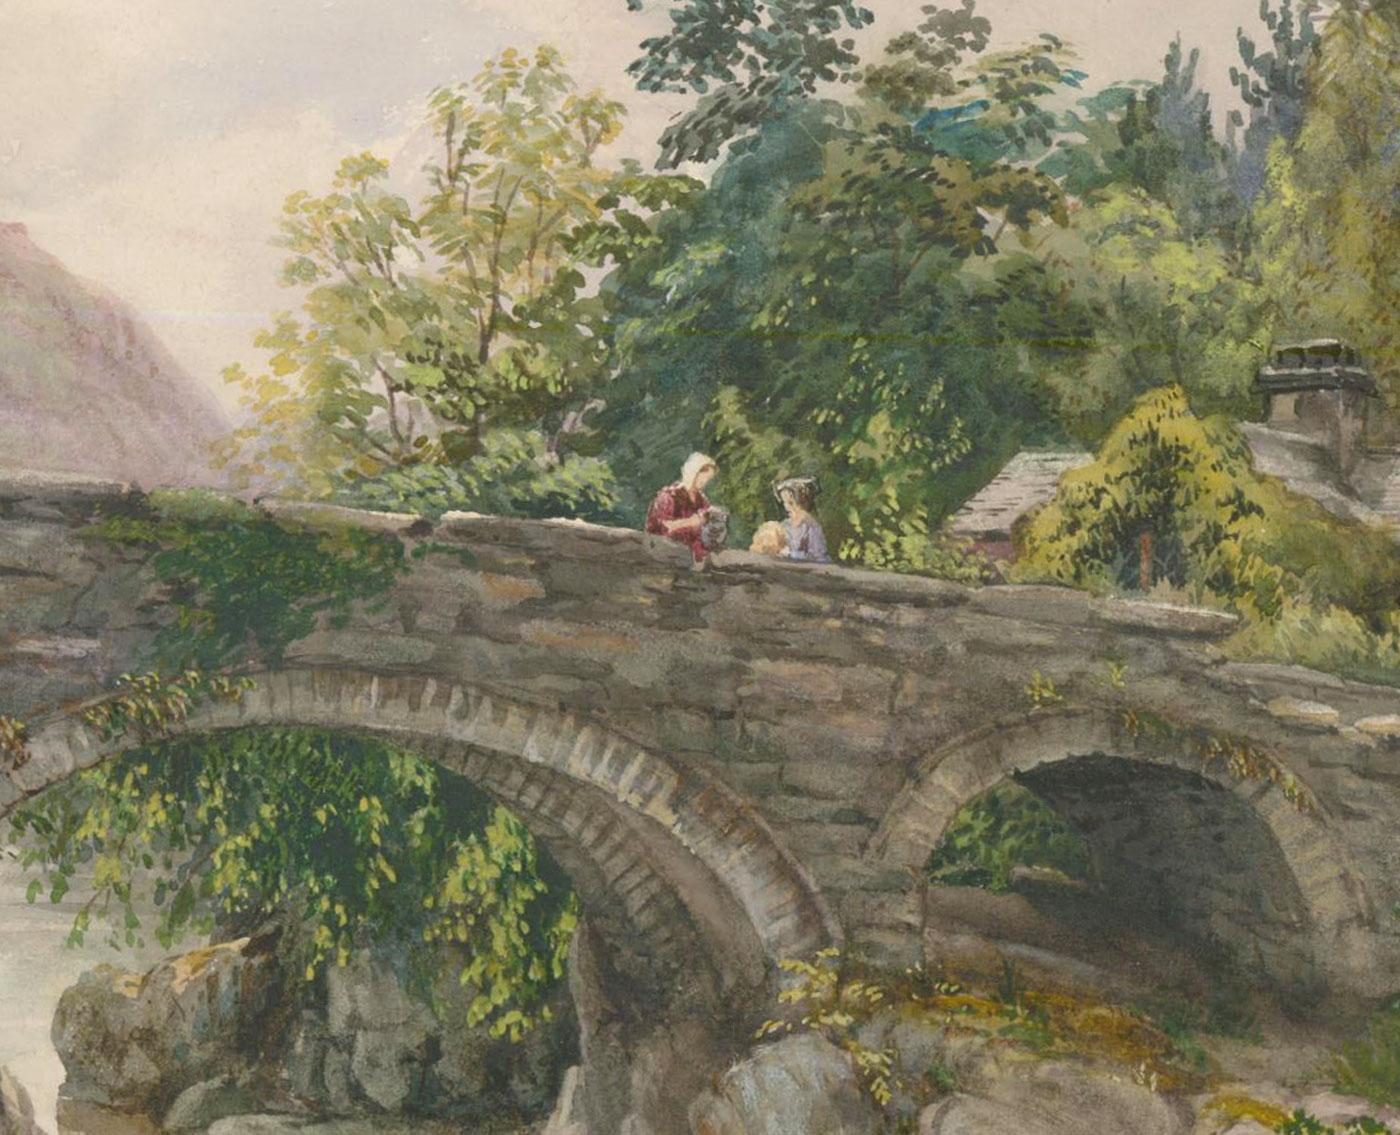 Scenic landscape in watercolours. Villagers on Pont-y-Pair Bridge. Signed lower left. Inscribed verso 'Pont-y-Pair, Betws-y-Coed, June 26th 1863'. On watercolour paper. 